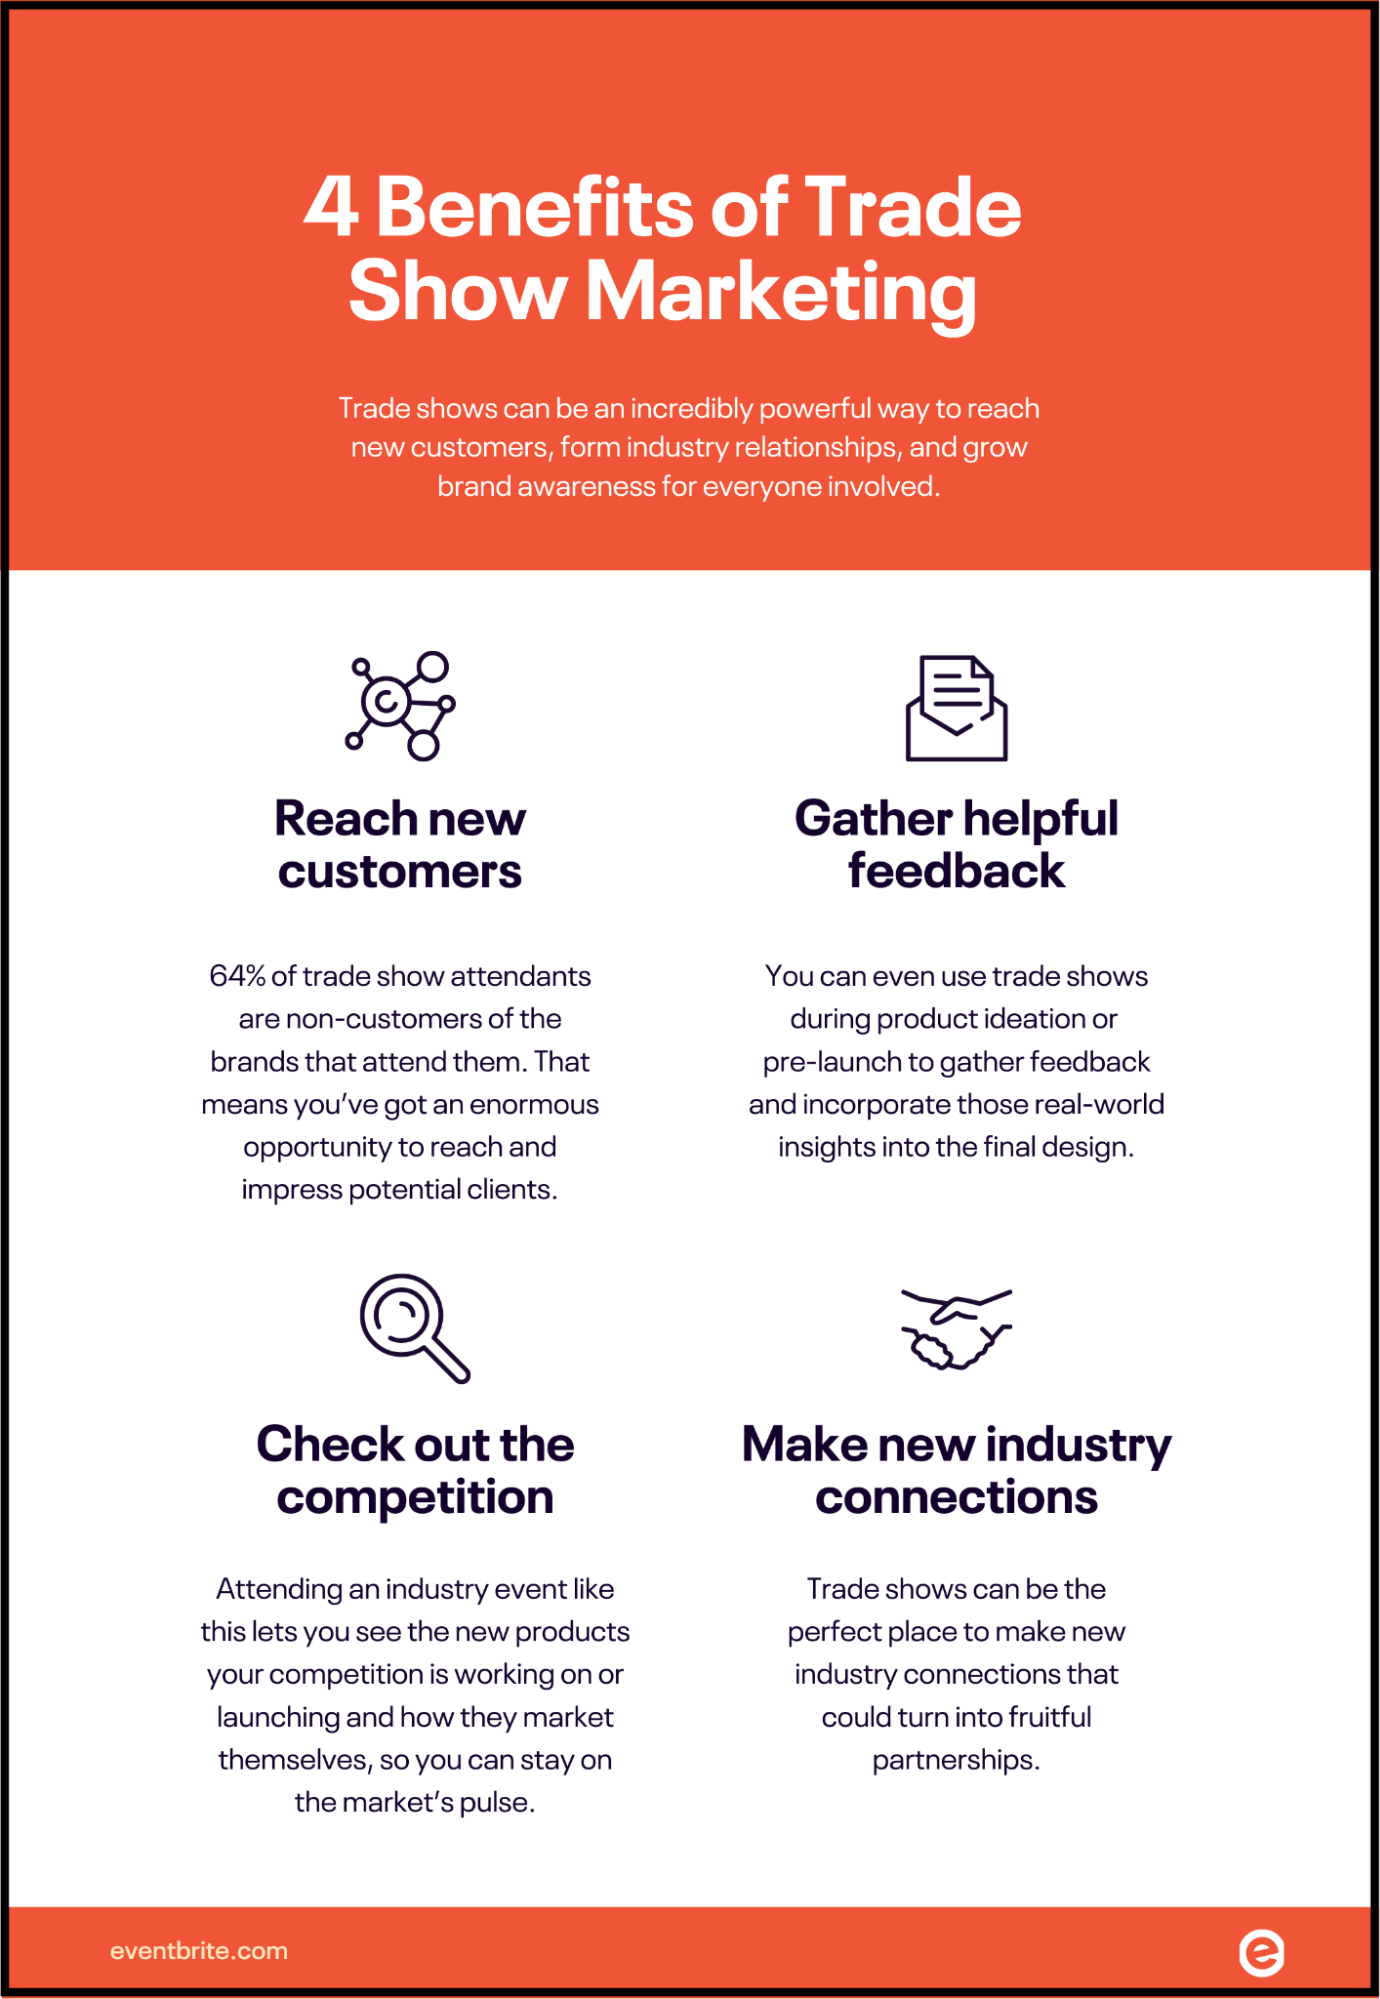 Benefits of trade show marketing infographic